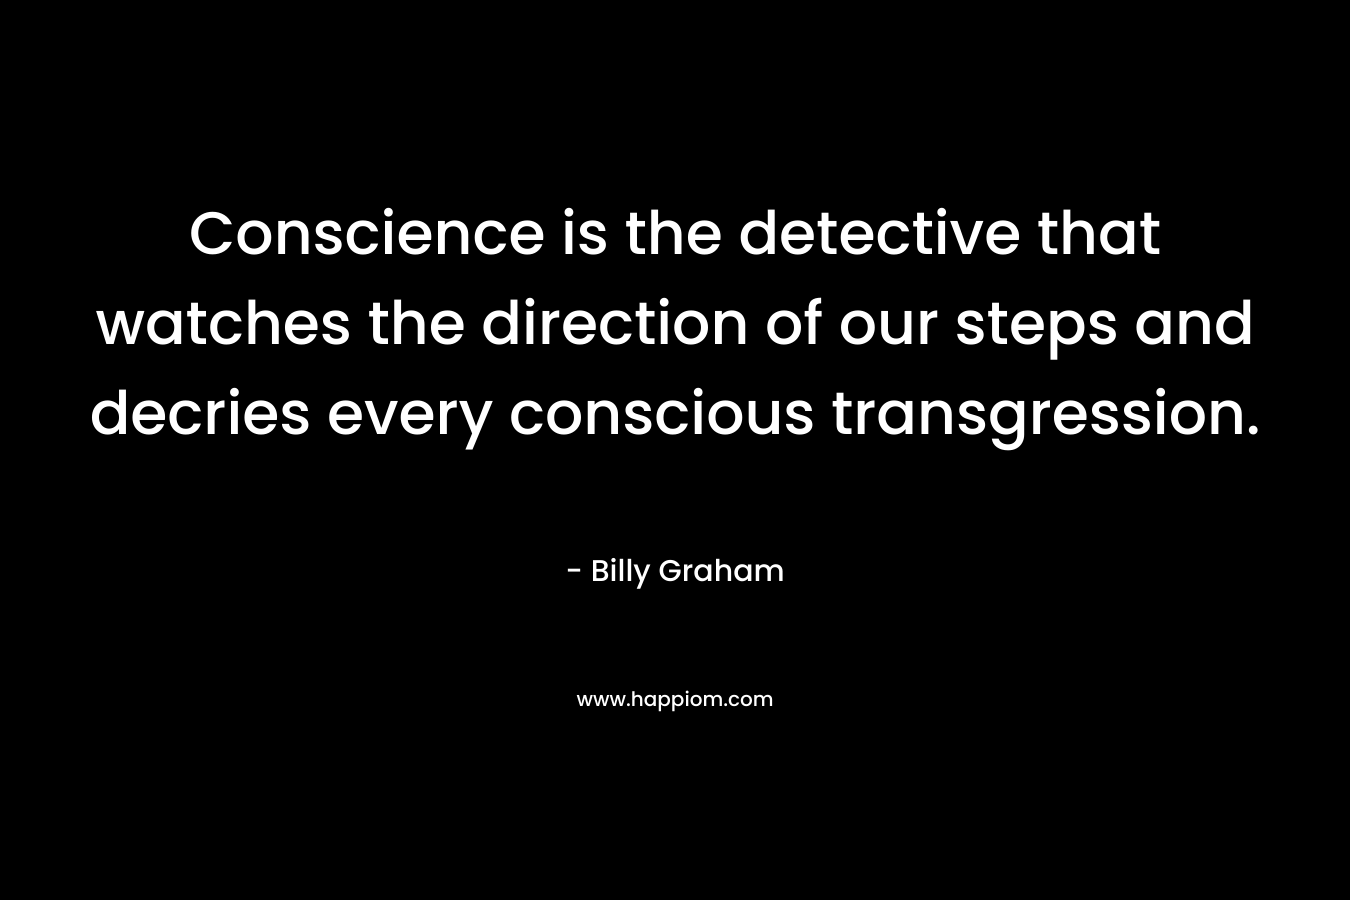 Conscience is the detective that watches the direction of our steps and decries every conscious transgression. – Billy Graham